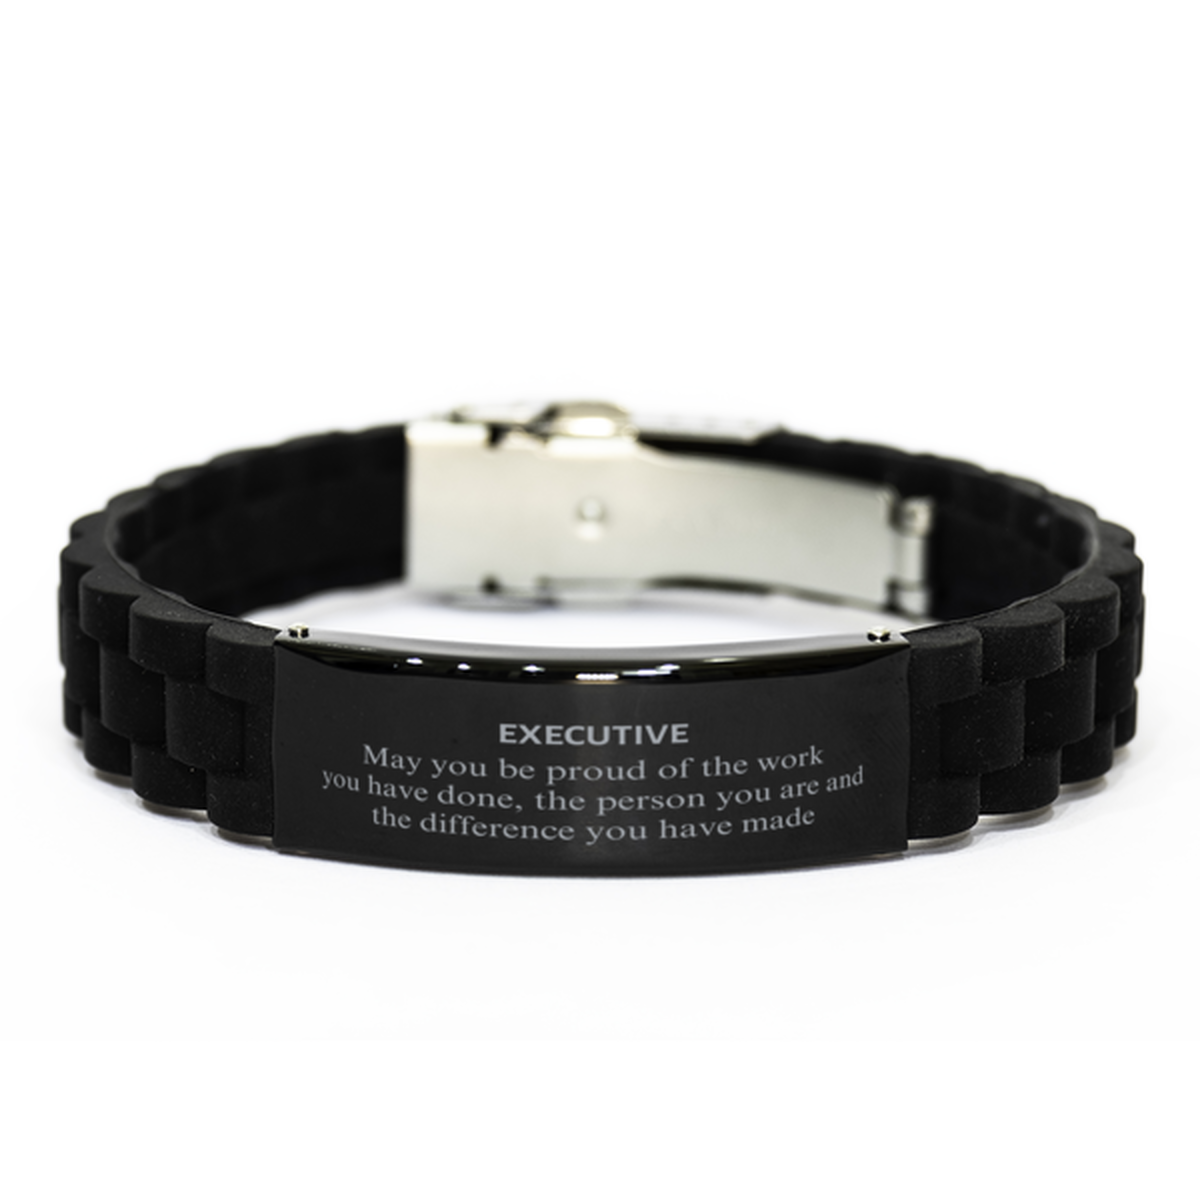 Executive May you be proud of the work you have done, Retirement Executive Black Glidelock Clasp Bracelet for Colleague Appreciation Gifts Amazing for Executive